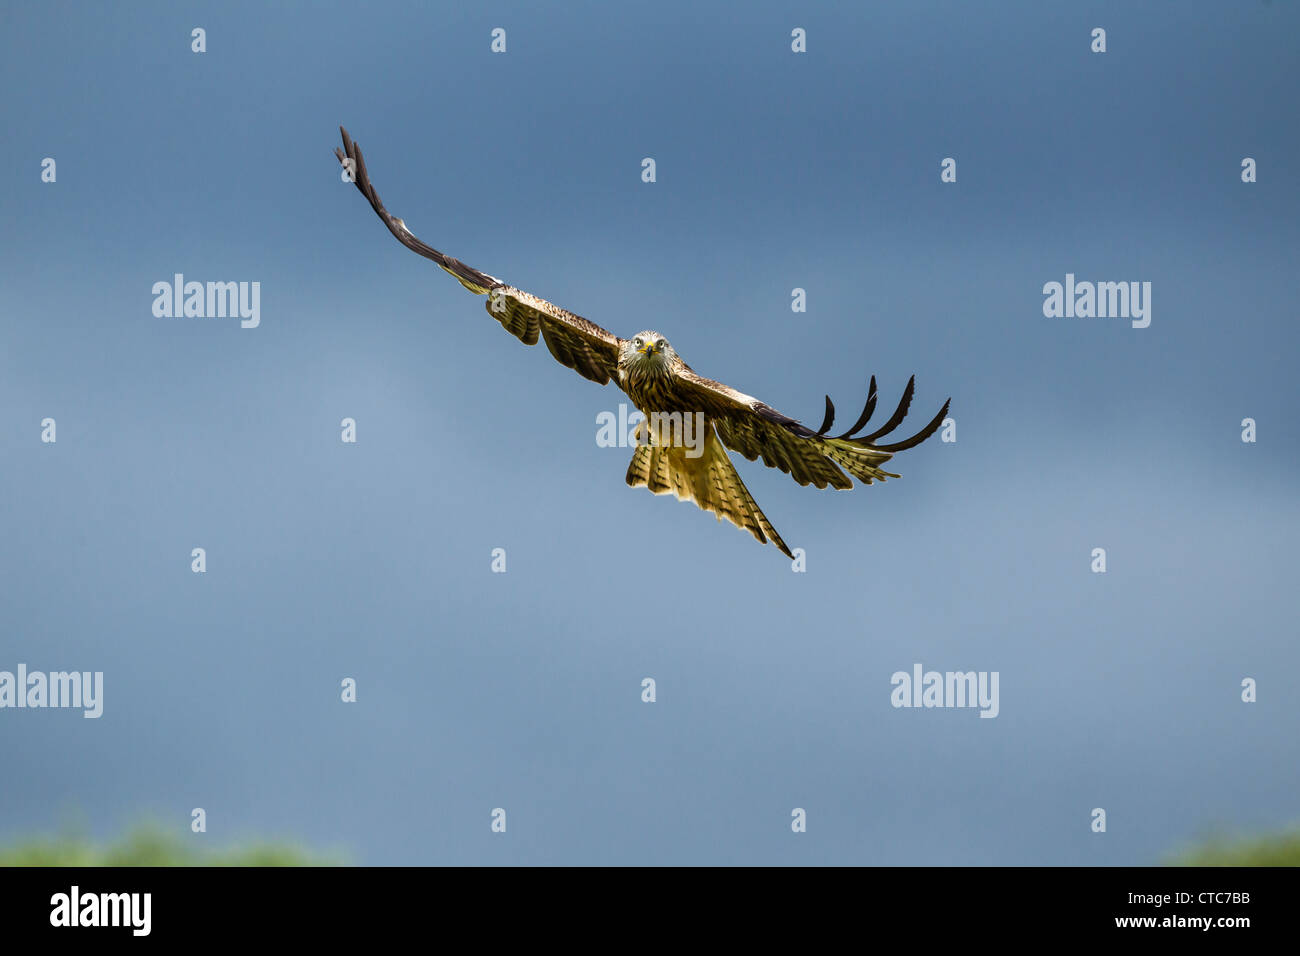 Red kite in flight against a clear blue sky Stock Photo